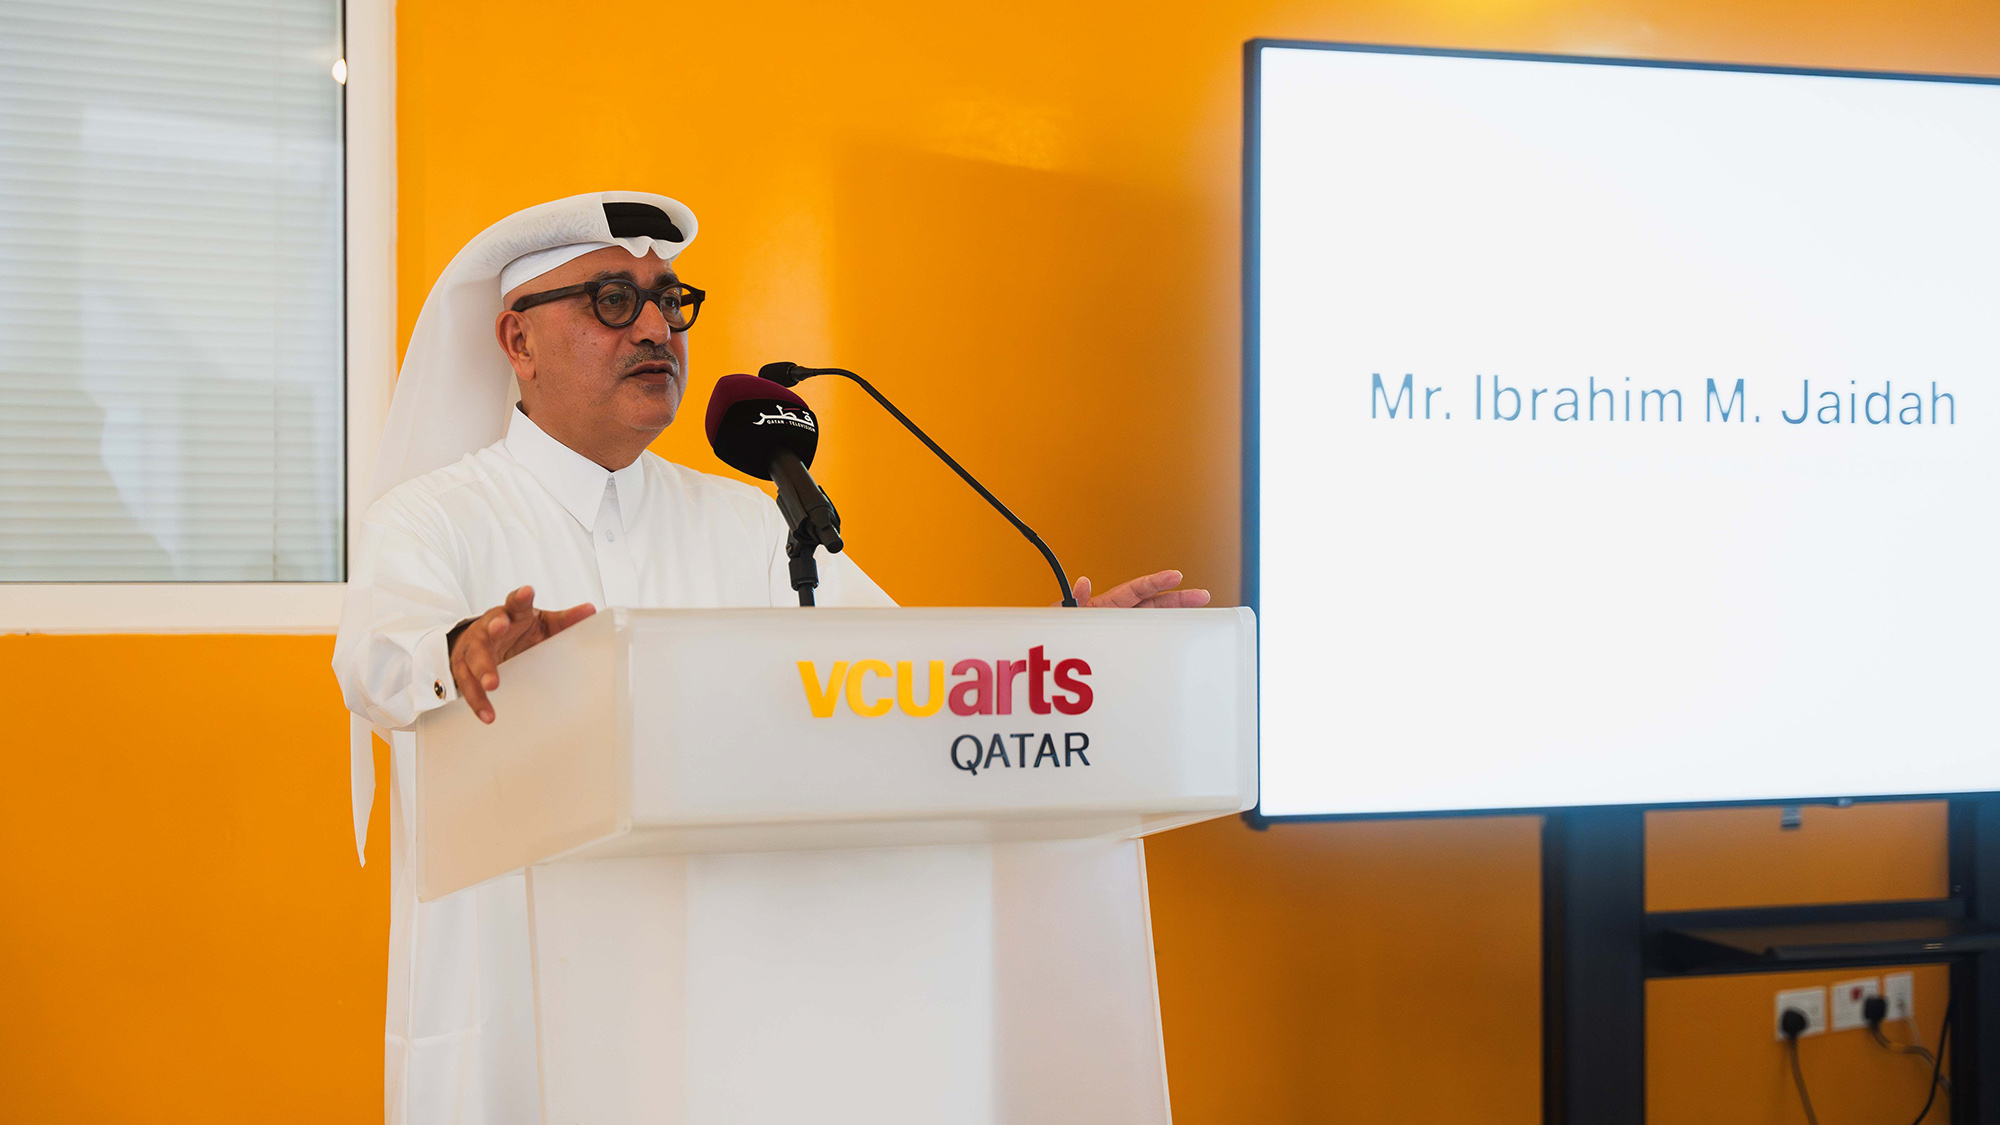 Ibrahim Mohamed Jaidah addressing the audience . He is standing at the podium with the words : V C U arts Qatar on the front . the screen behind him says Ibrahim Mohamed Jaidah